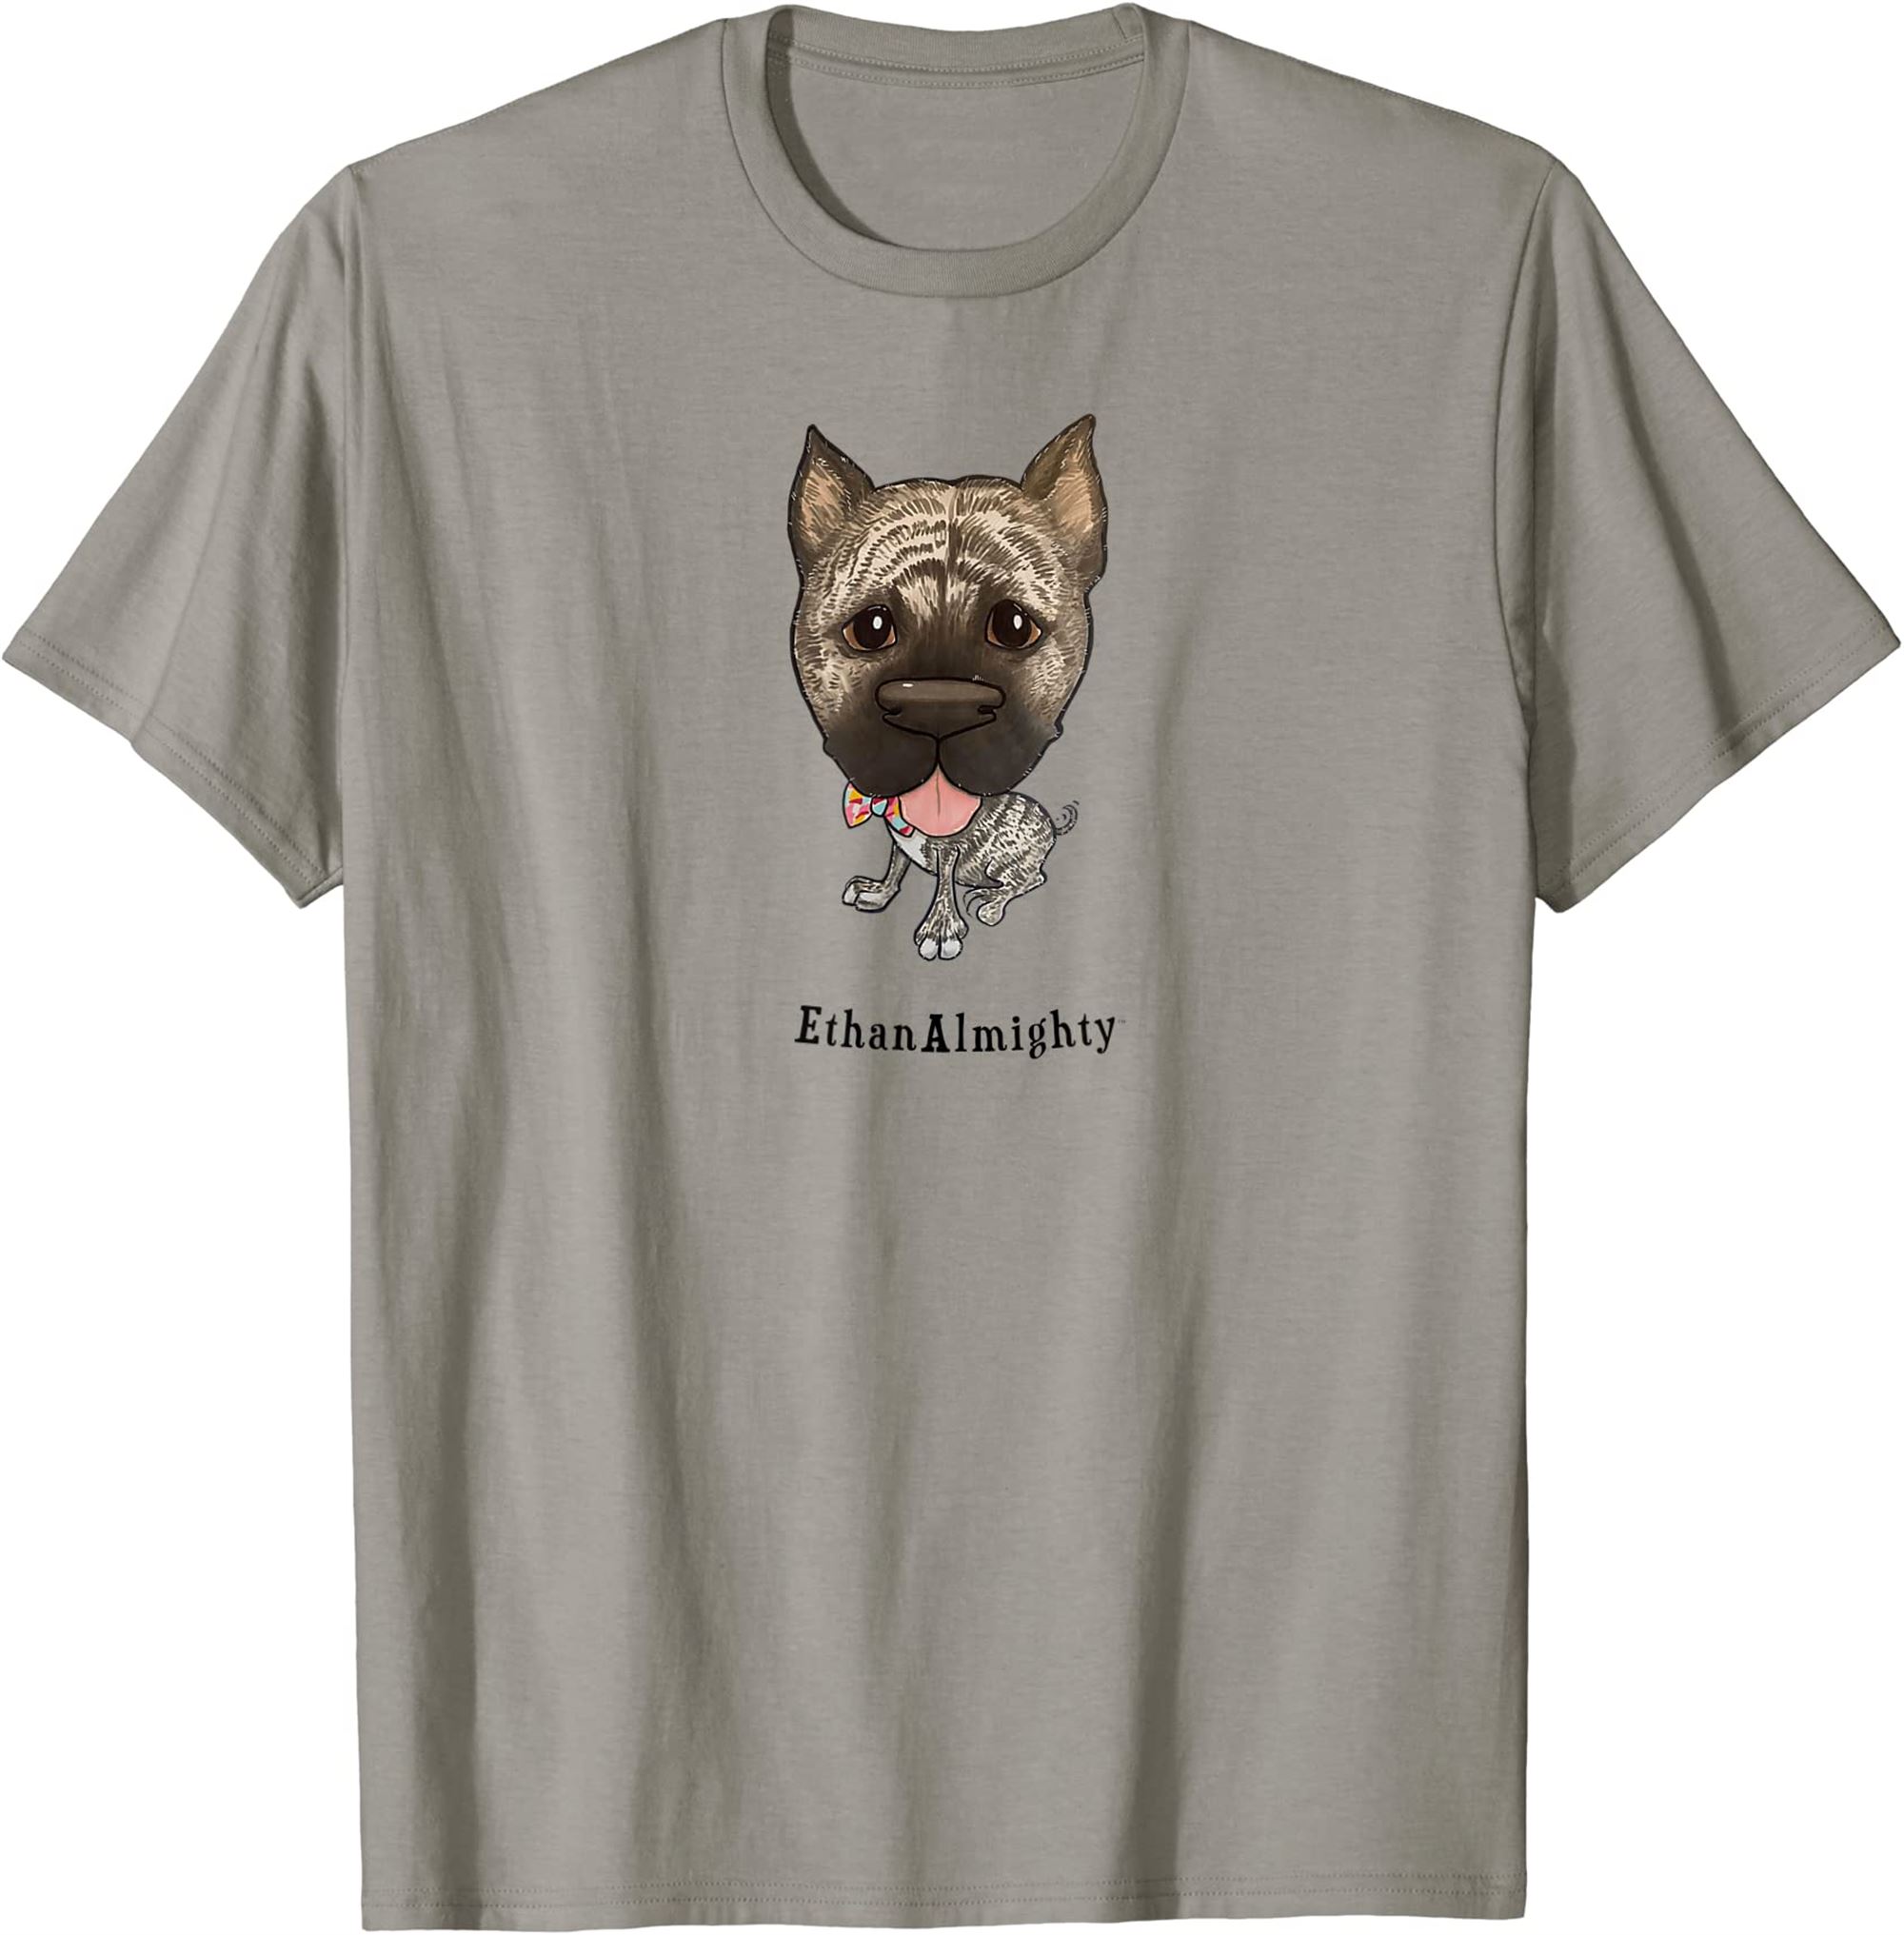 Ethanalmighty T-shirt Full Size Up To 5xl